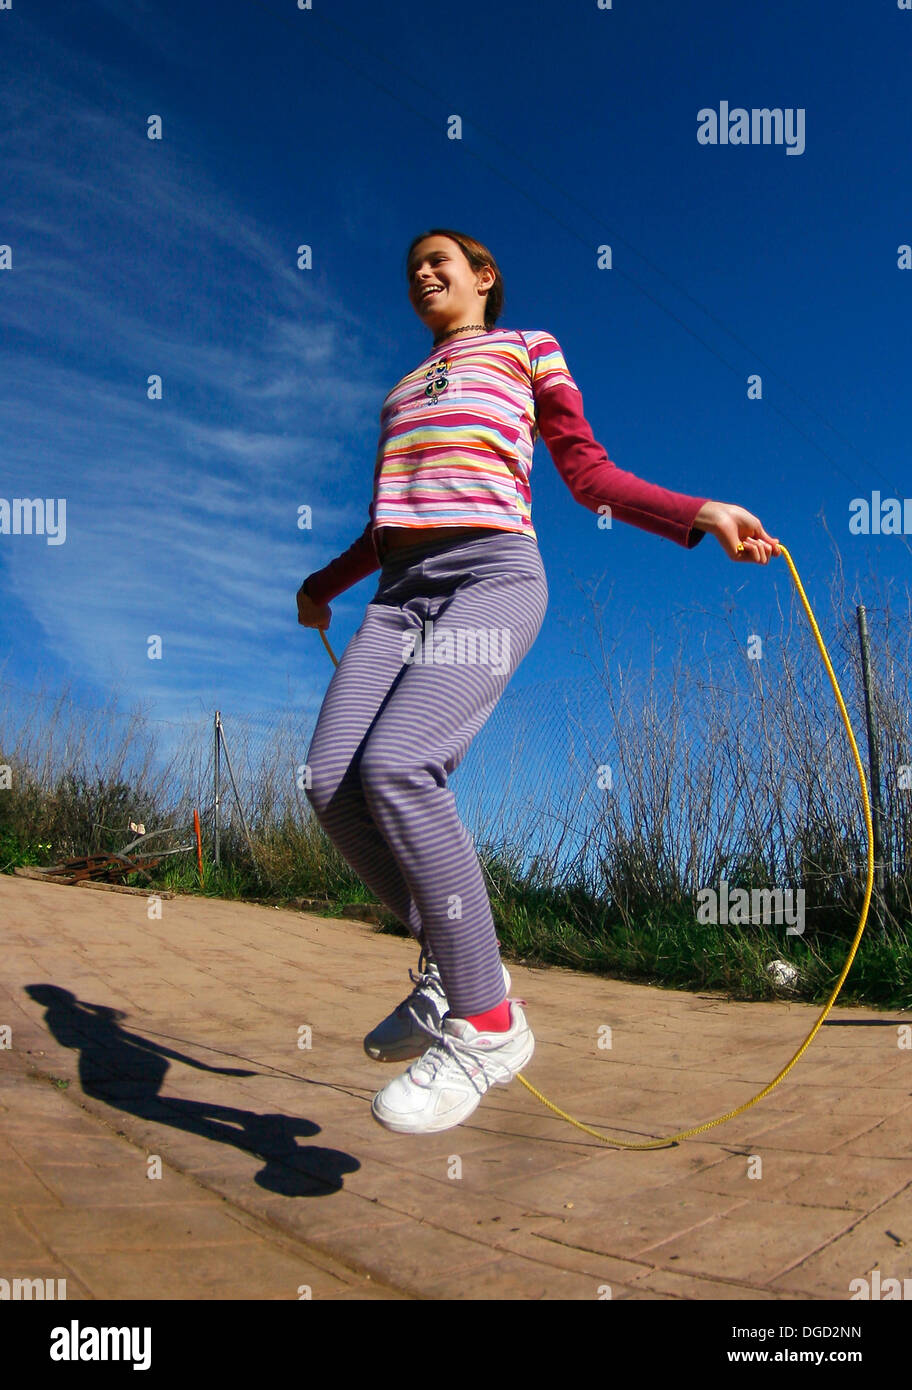 A young girl jumps a rope. Stock Photo